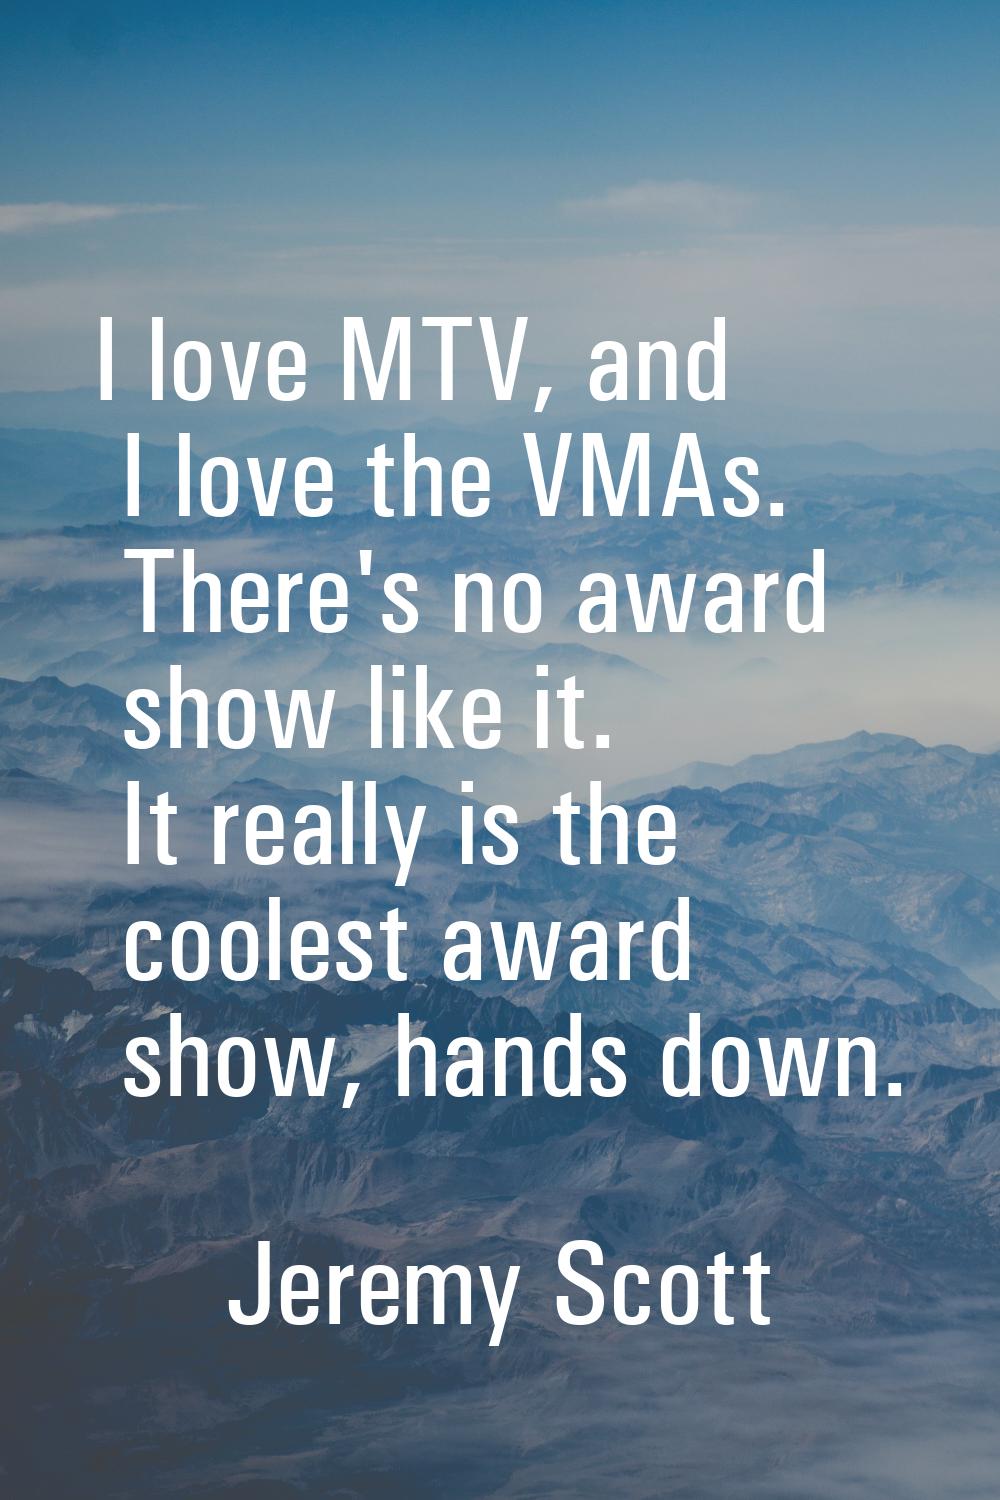 I love MTV, and I love the VMAs. There's no award show like it. It really is the coolest award show